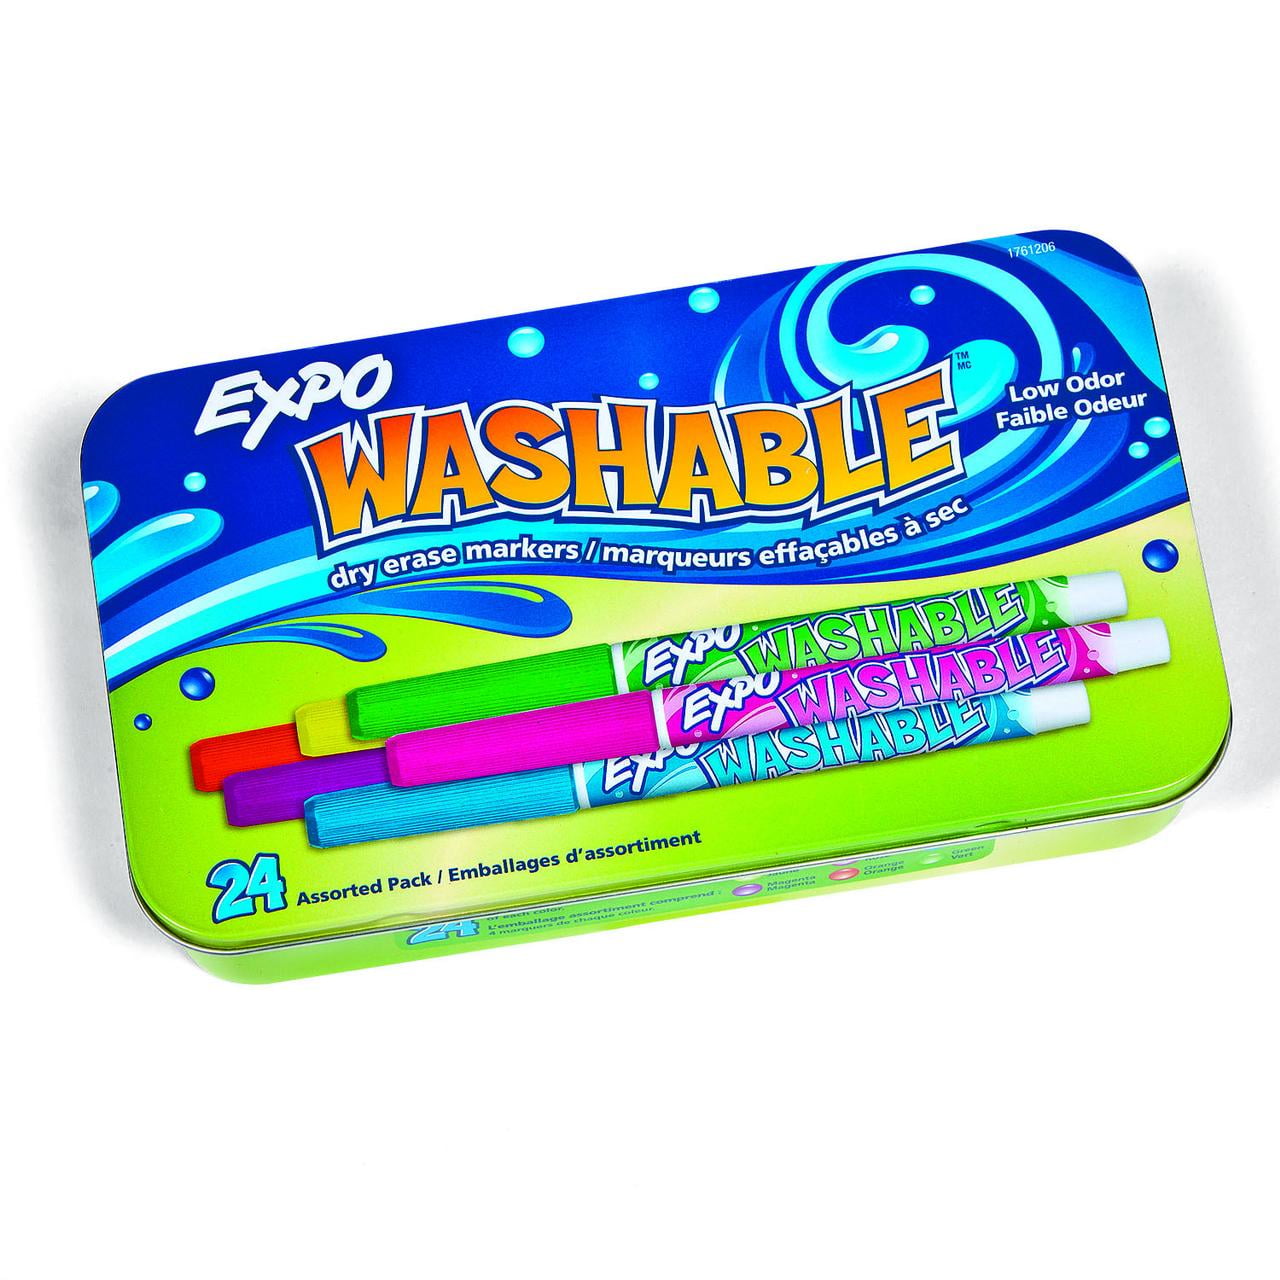 Expo Washable Low Odor Dry Erase Markers - Basic Supplies - 16 Pieces